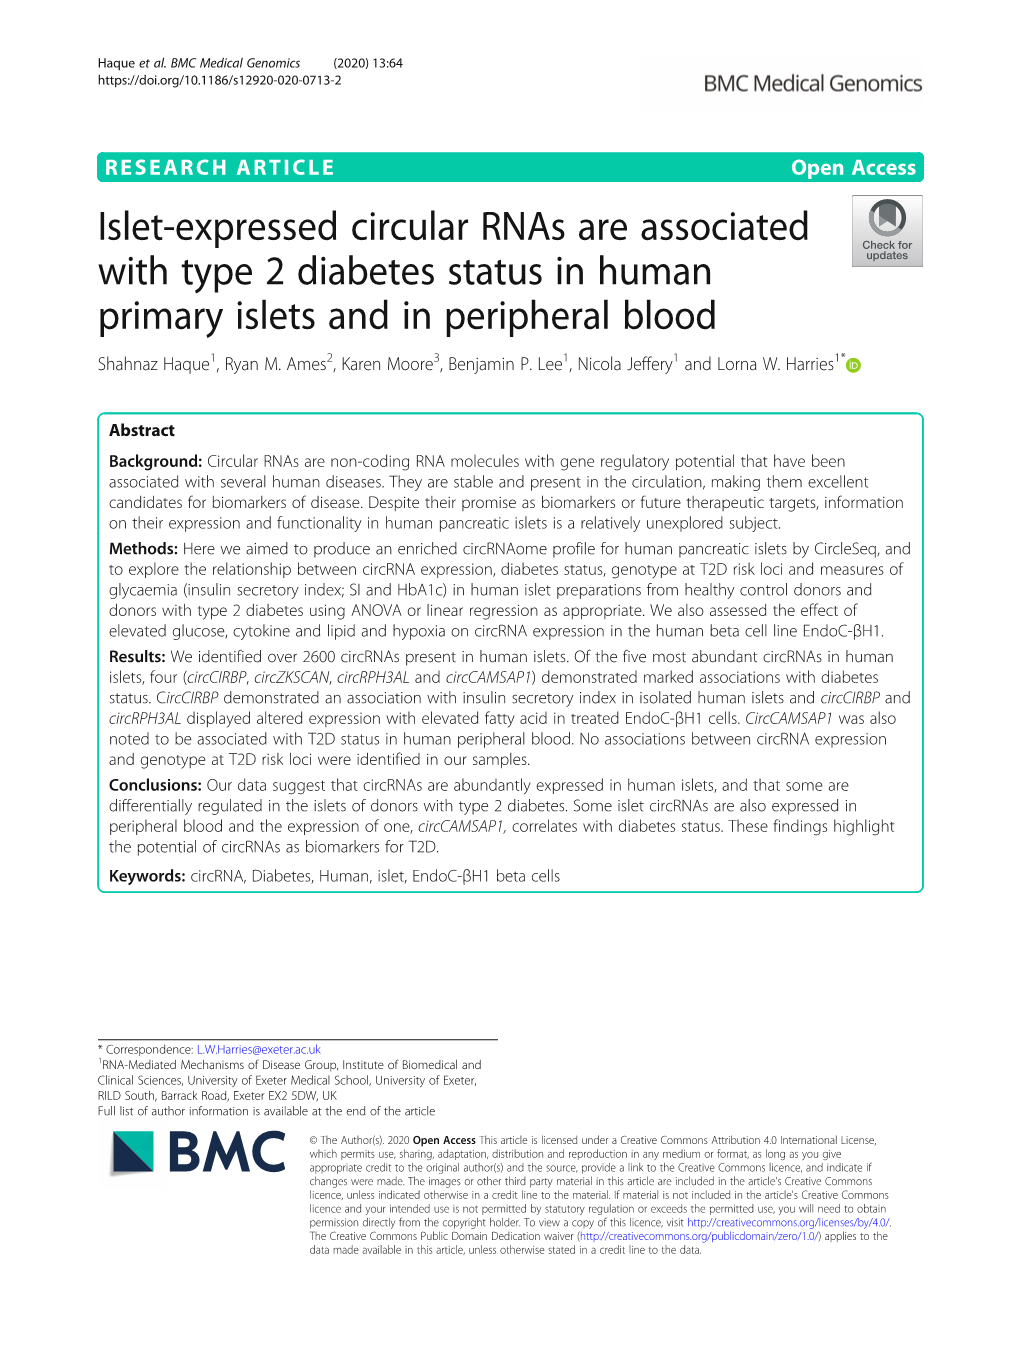 Islet-Expressed Circular Rnas Are Associated with Type 2 Diabetes Status in Human Primary Islets and in Peripheral Blood Shahnaz Haque1, Ryan M